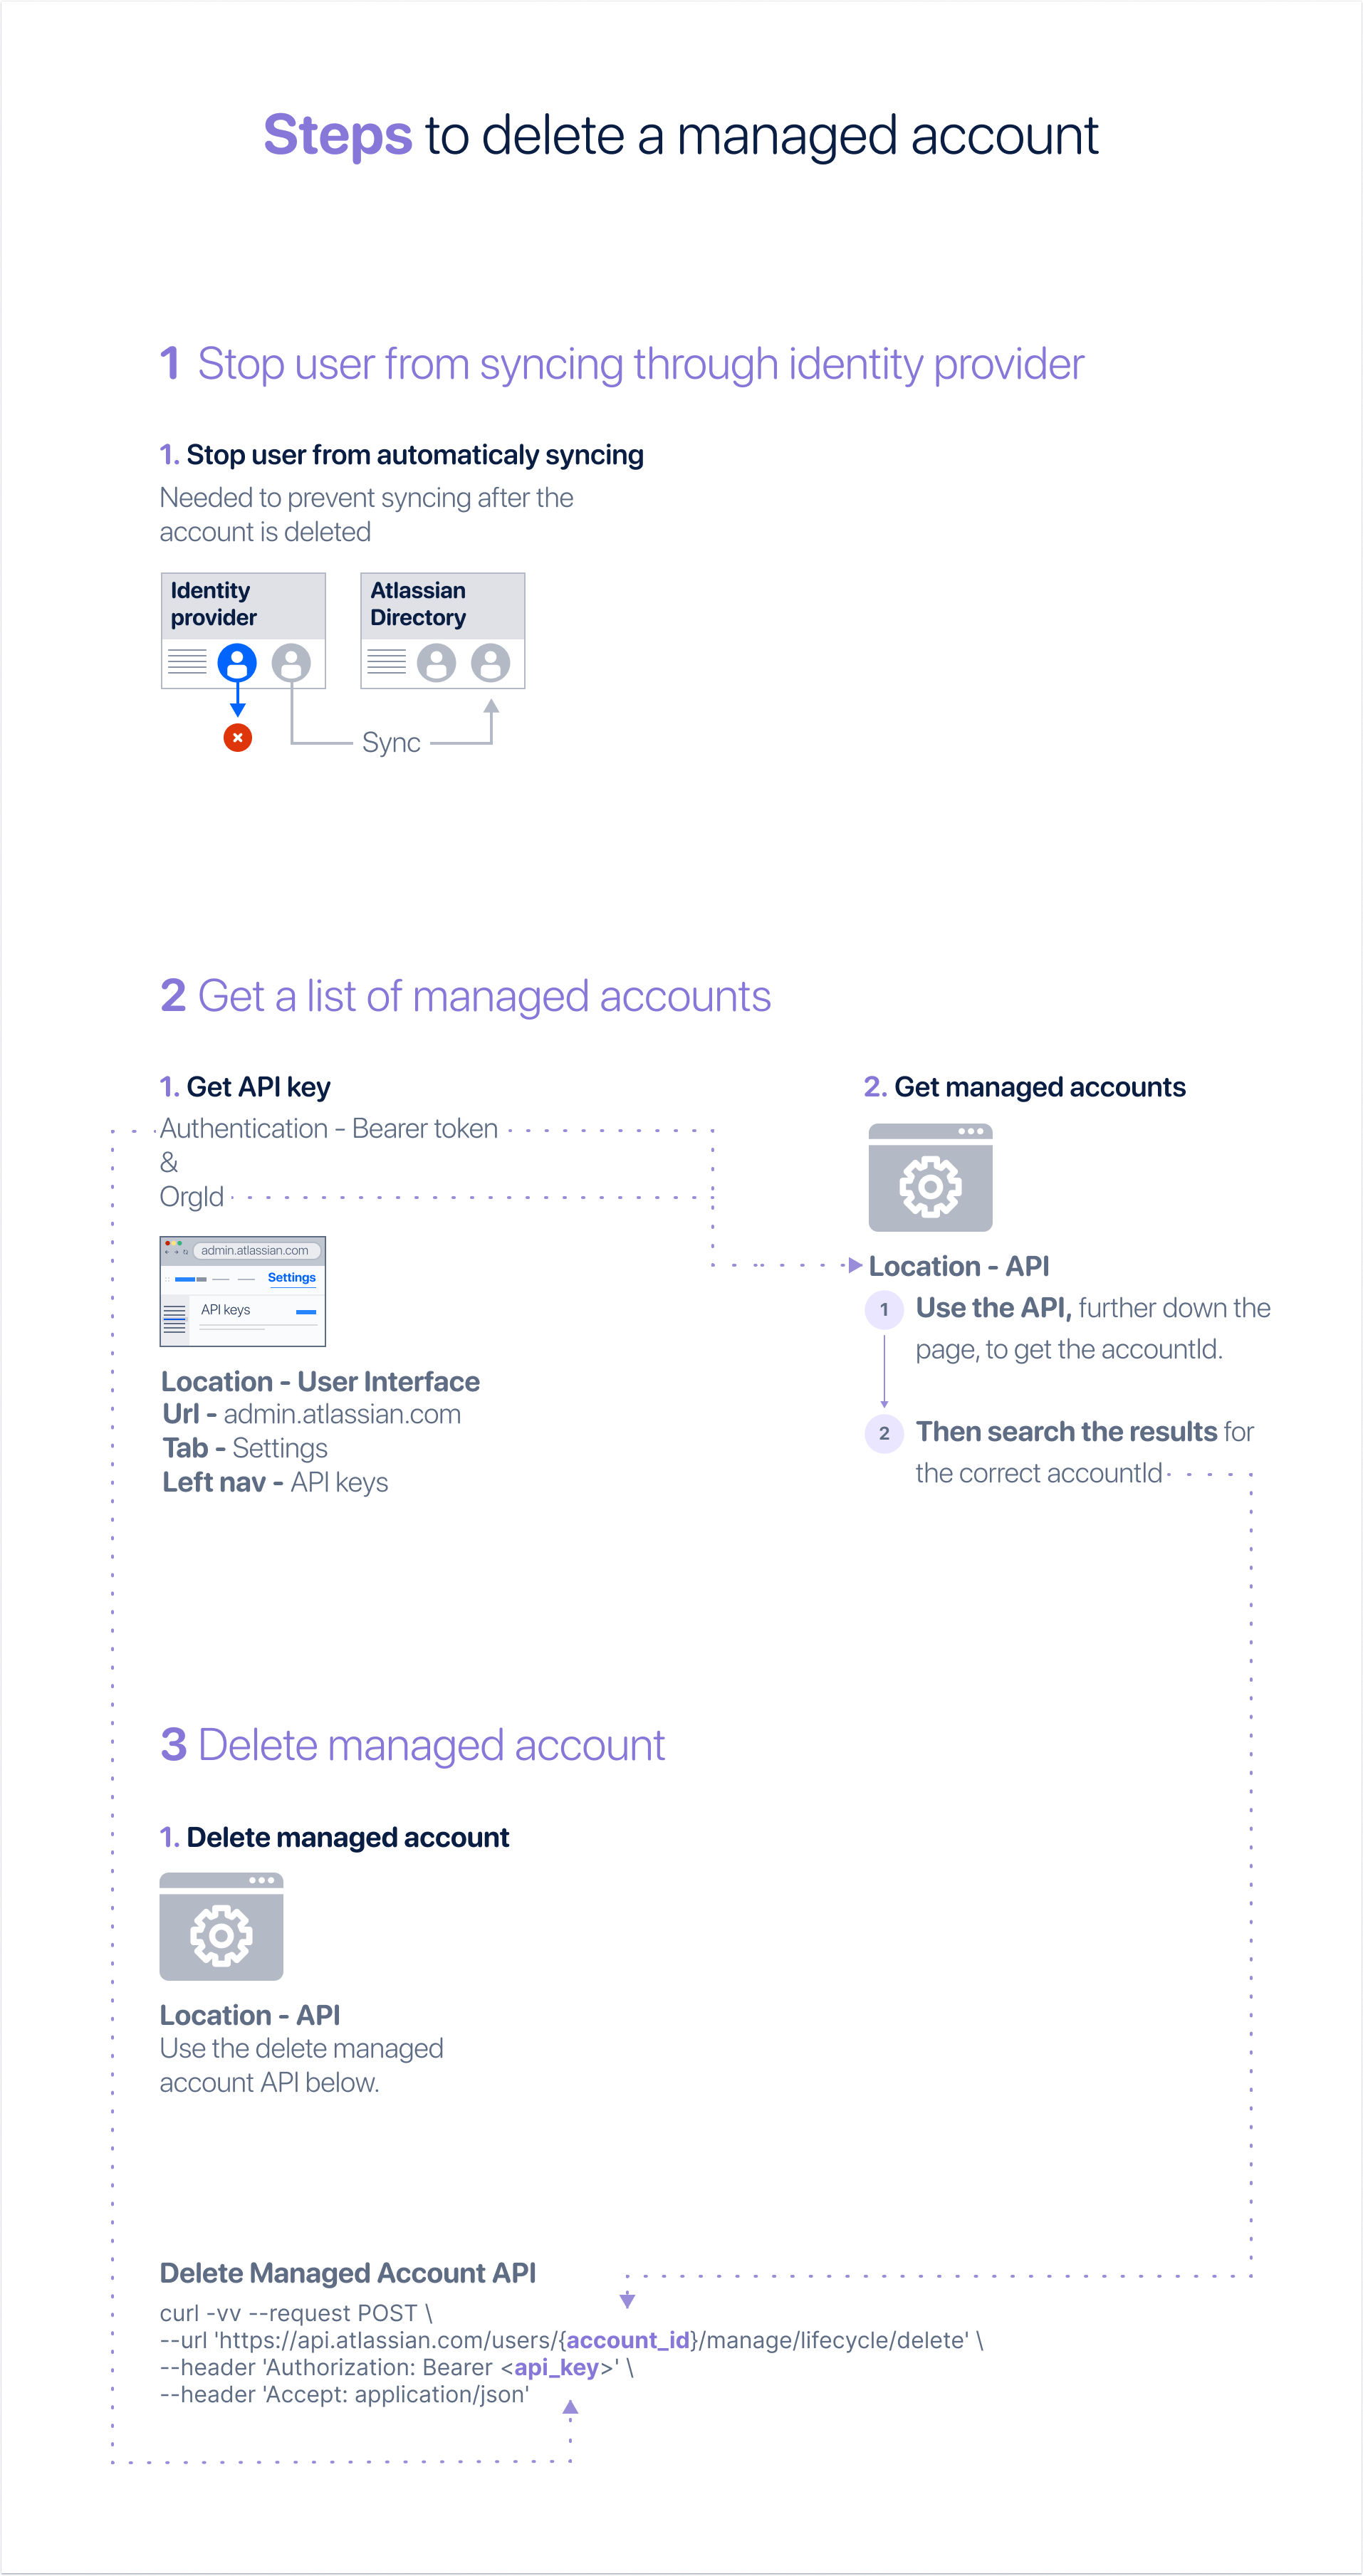 Illustration showing the steps to delete account